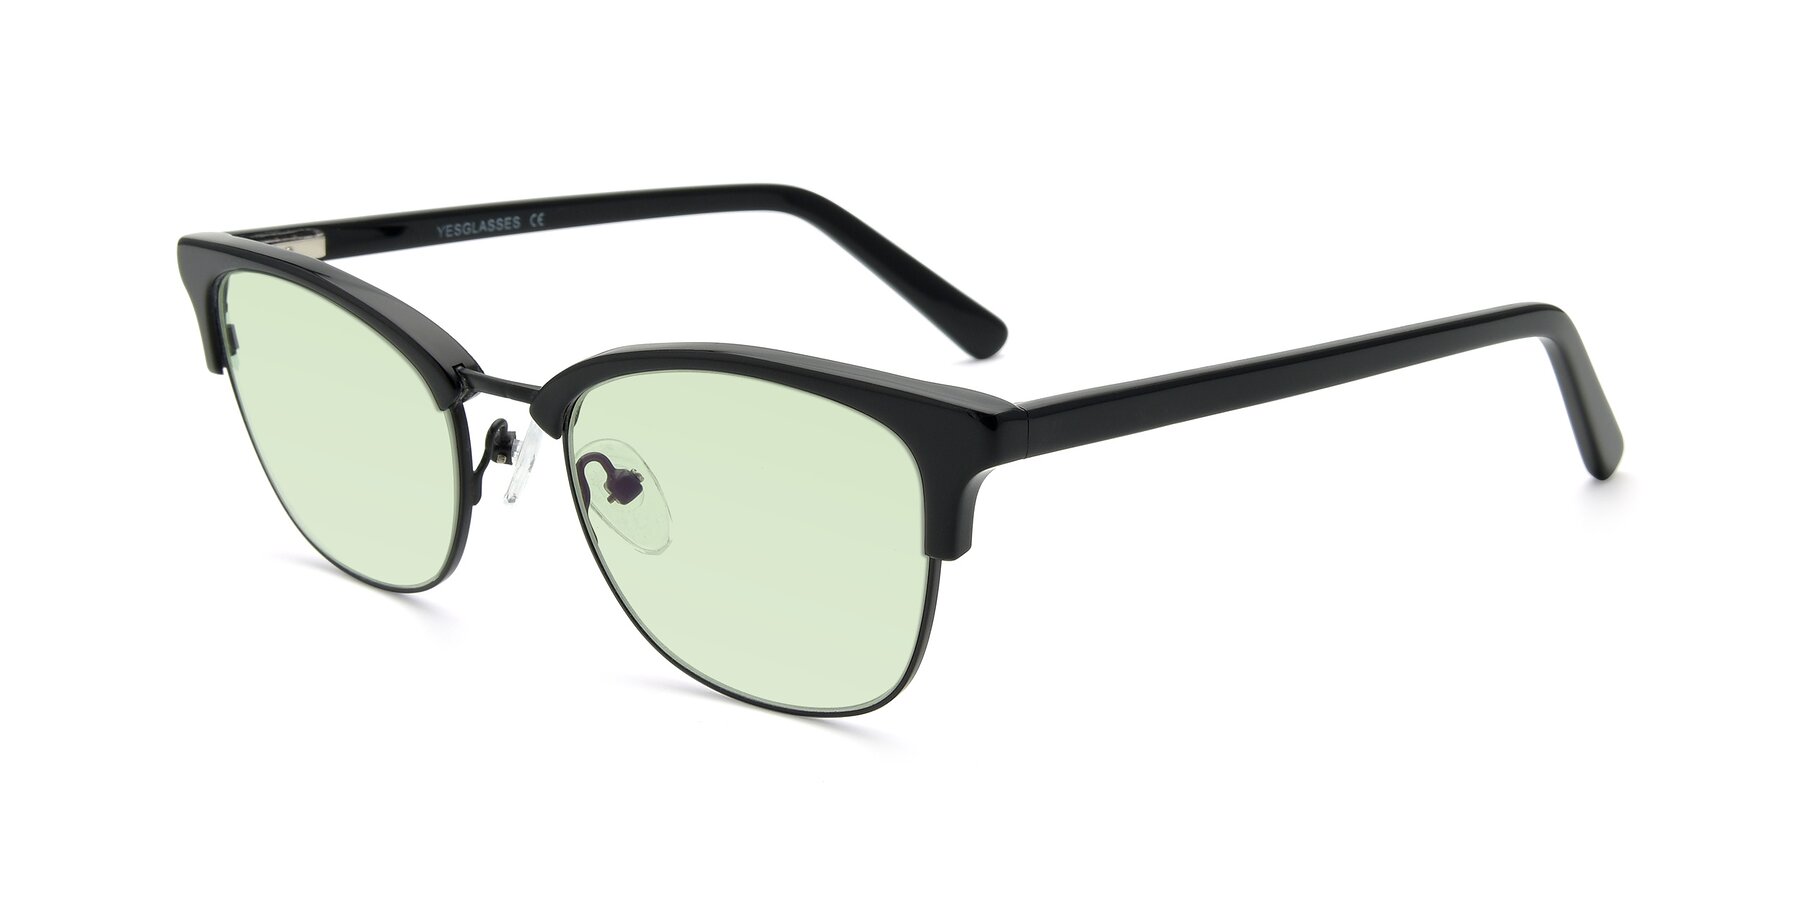 Angle of 17463 in Black with Light Green Tinted Lenses